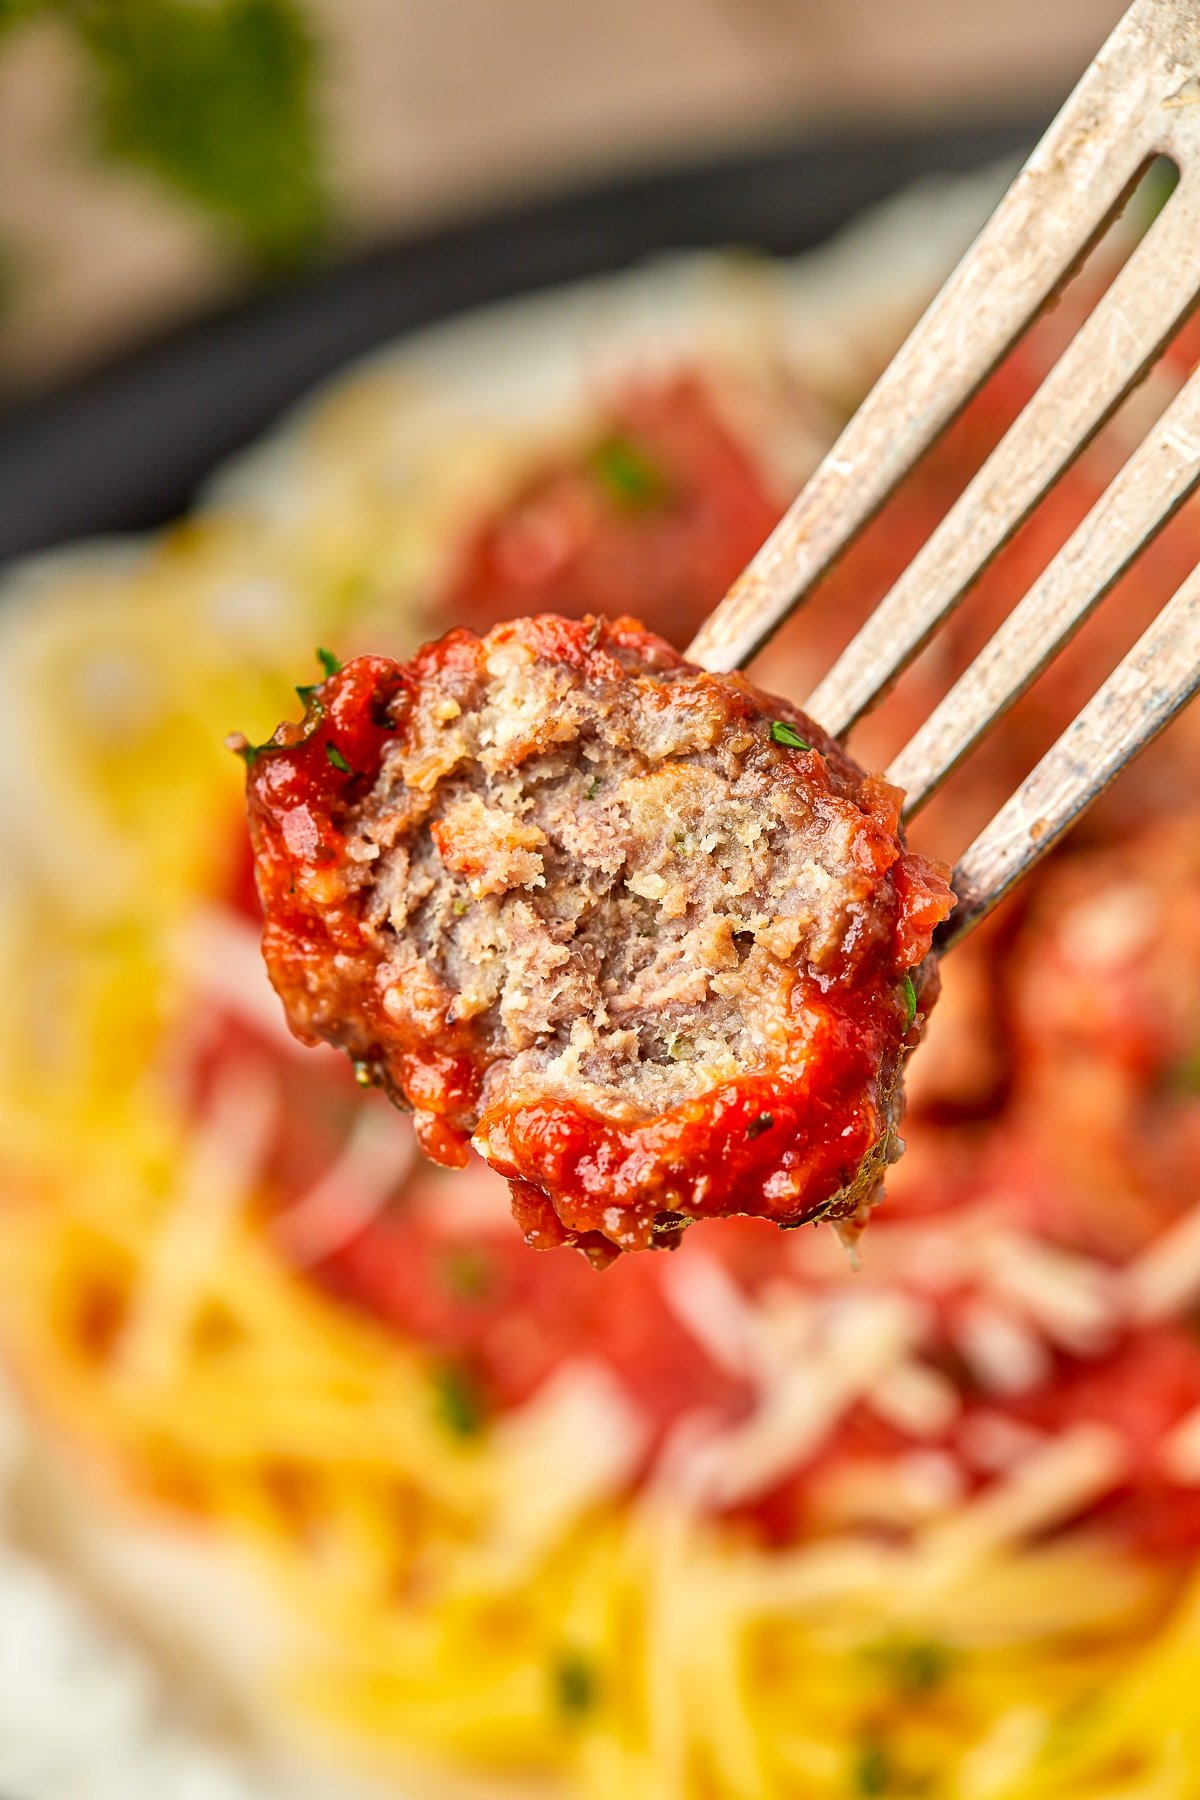 a fork holding up a baked meatball with a bite taken out